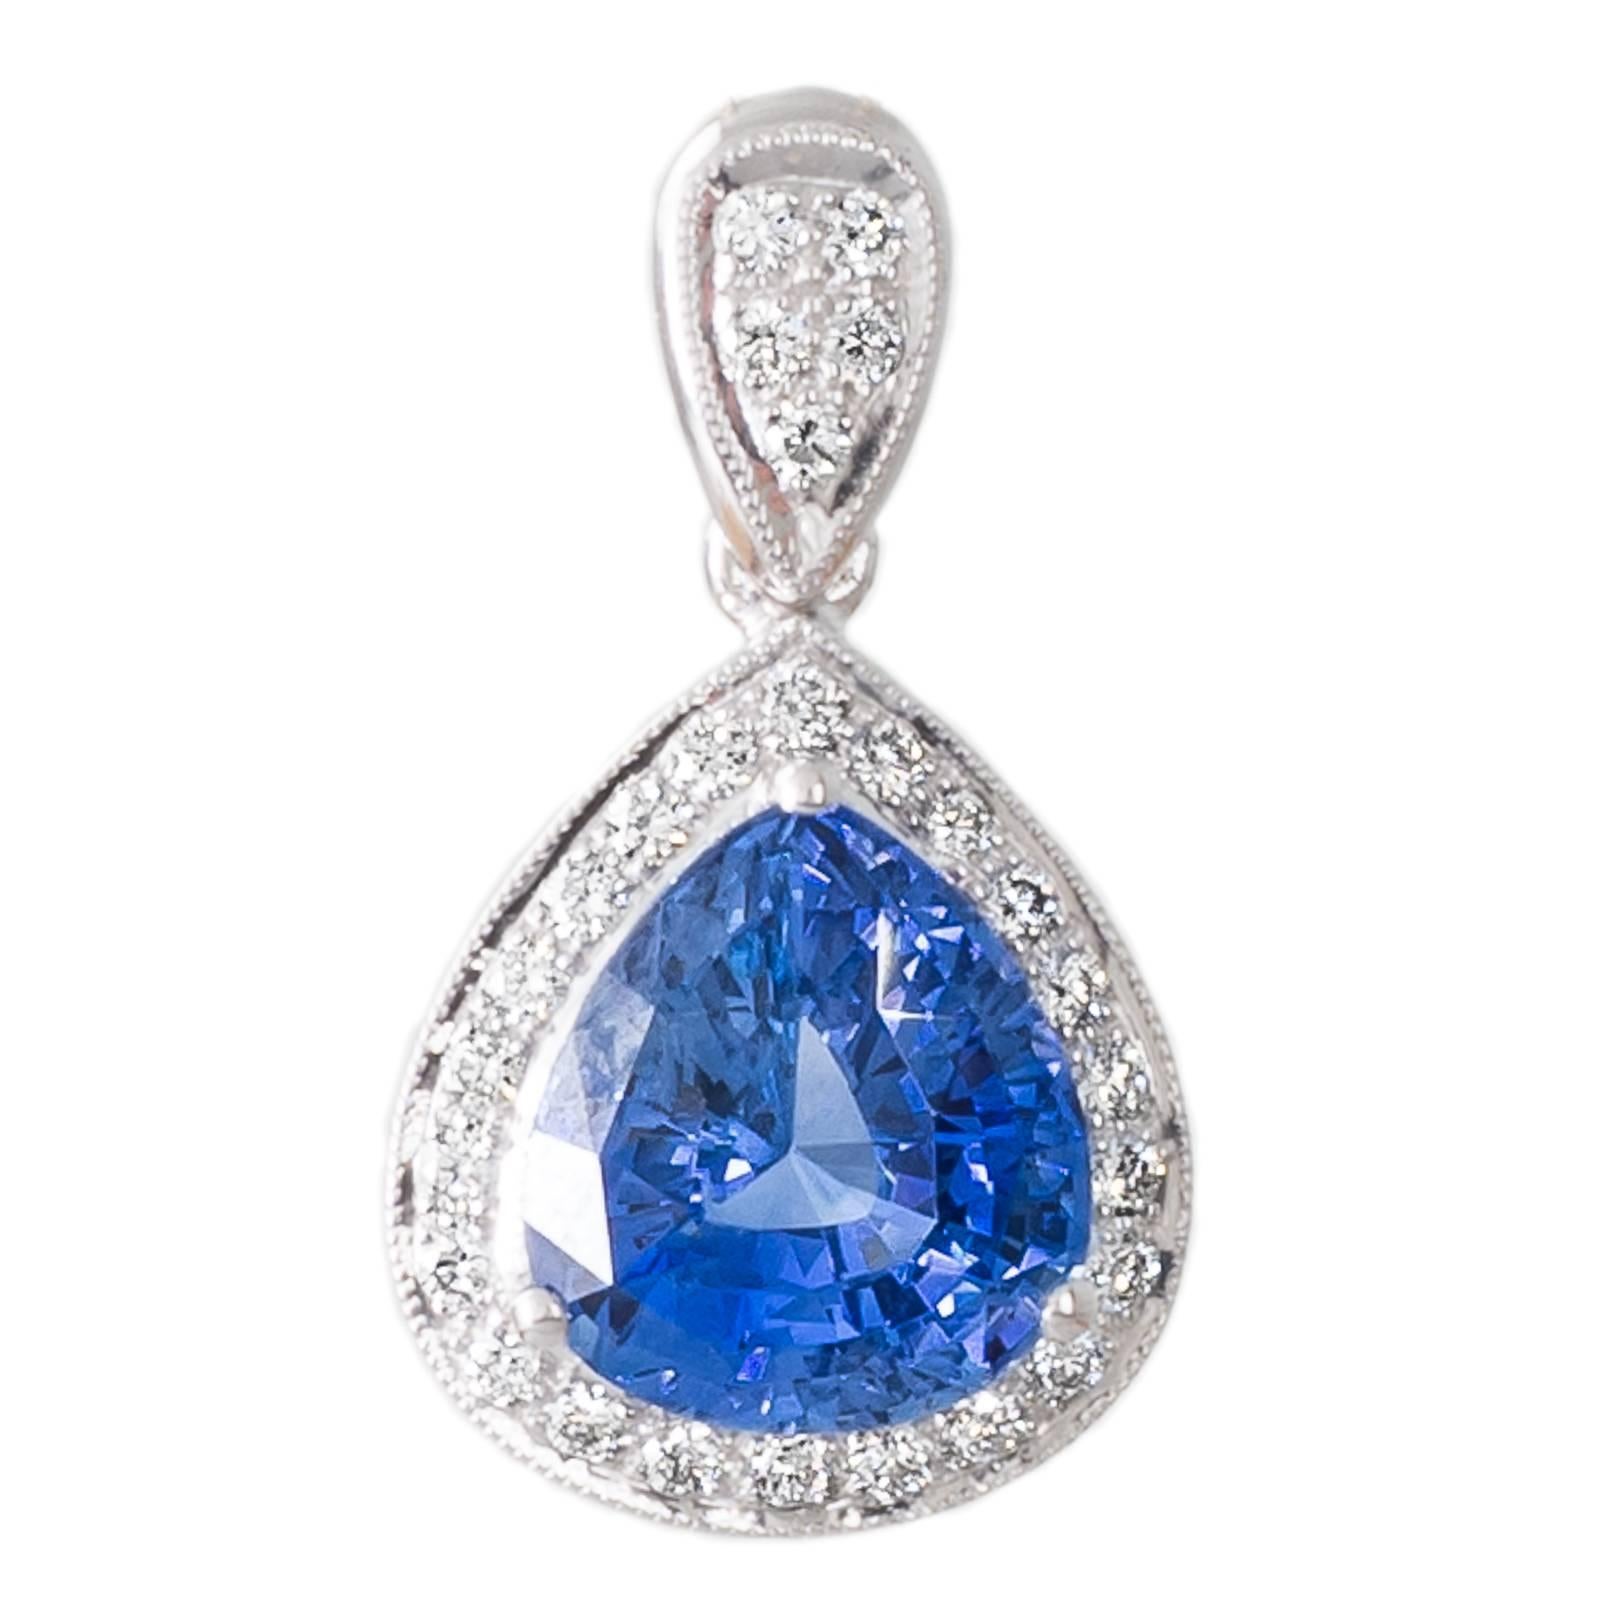 Pear Shaped Blue Sri Lankan Sapphire and Diamond Pendant with GIA Certificate For Sale